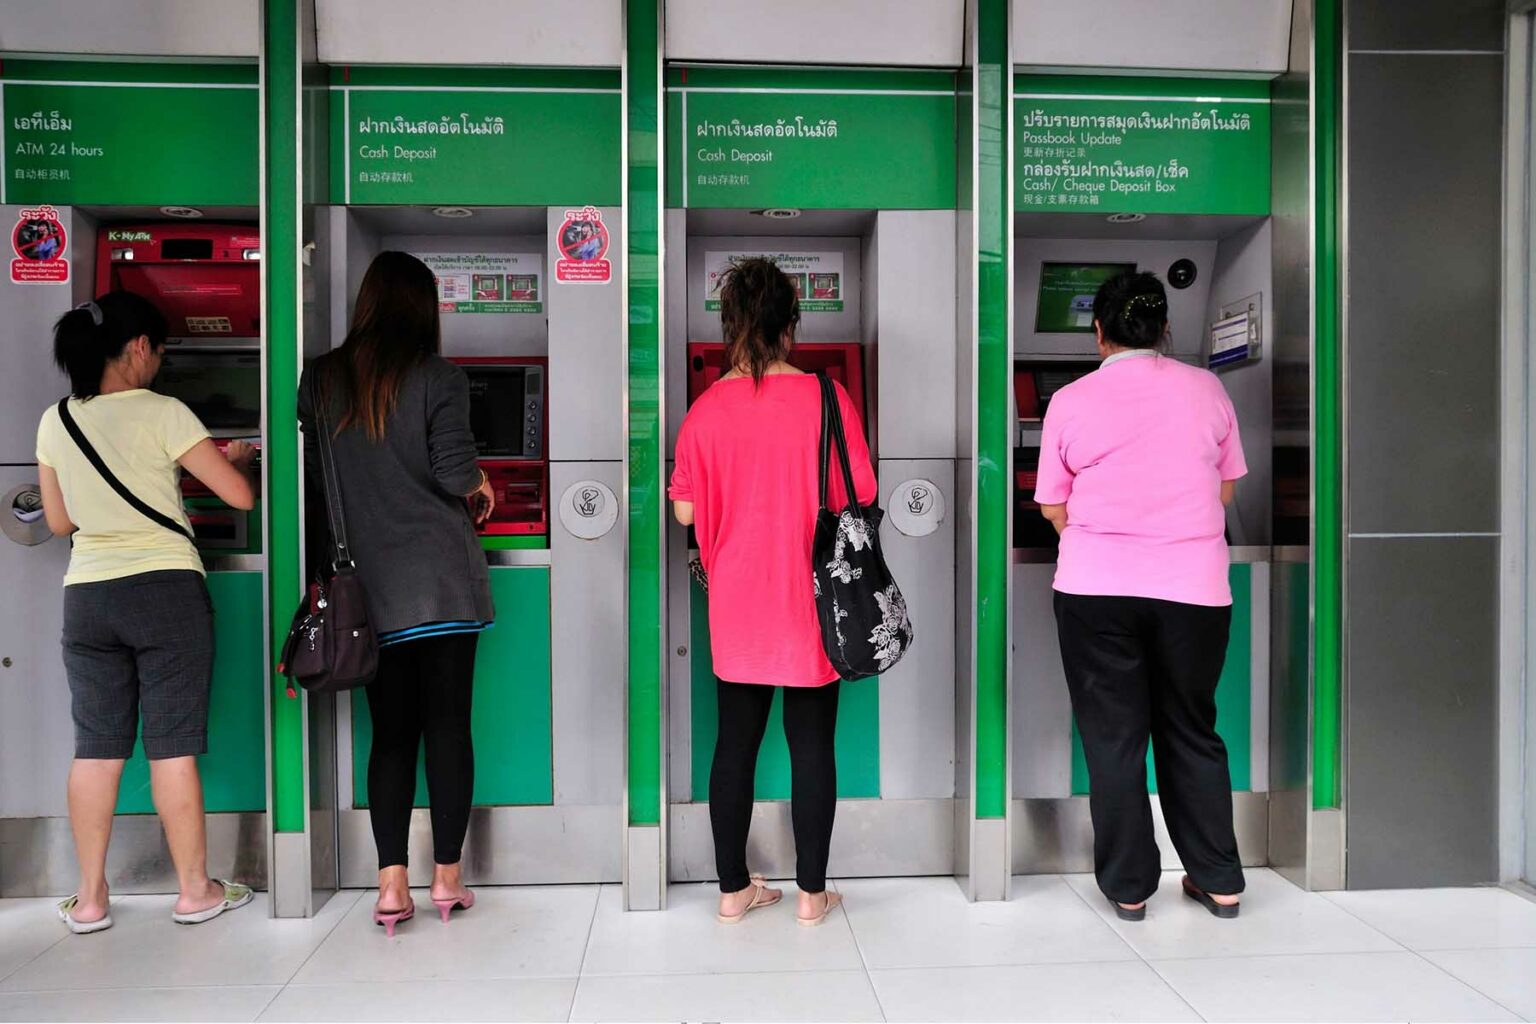 Four women stand in a row drawing money from green ATMs in Thailand.